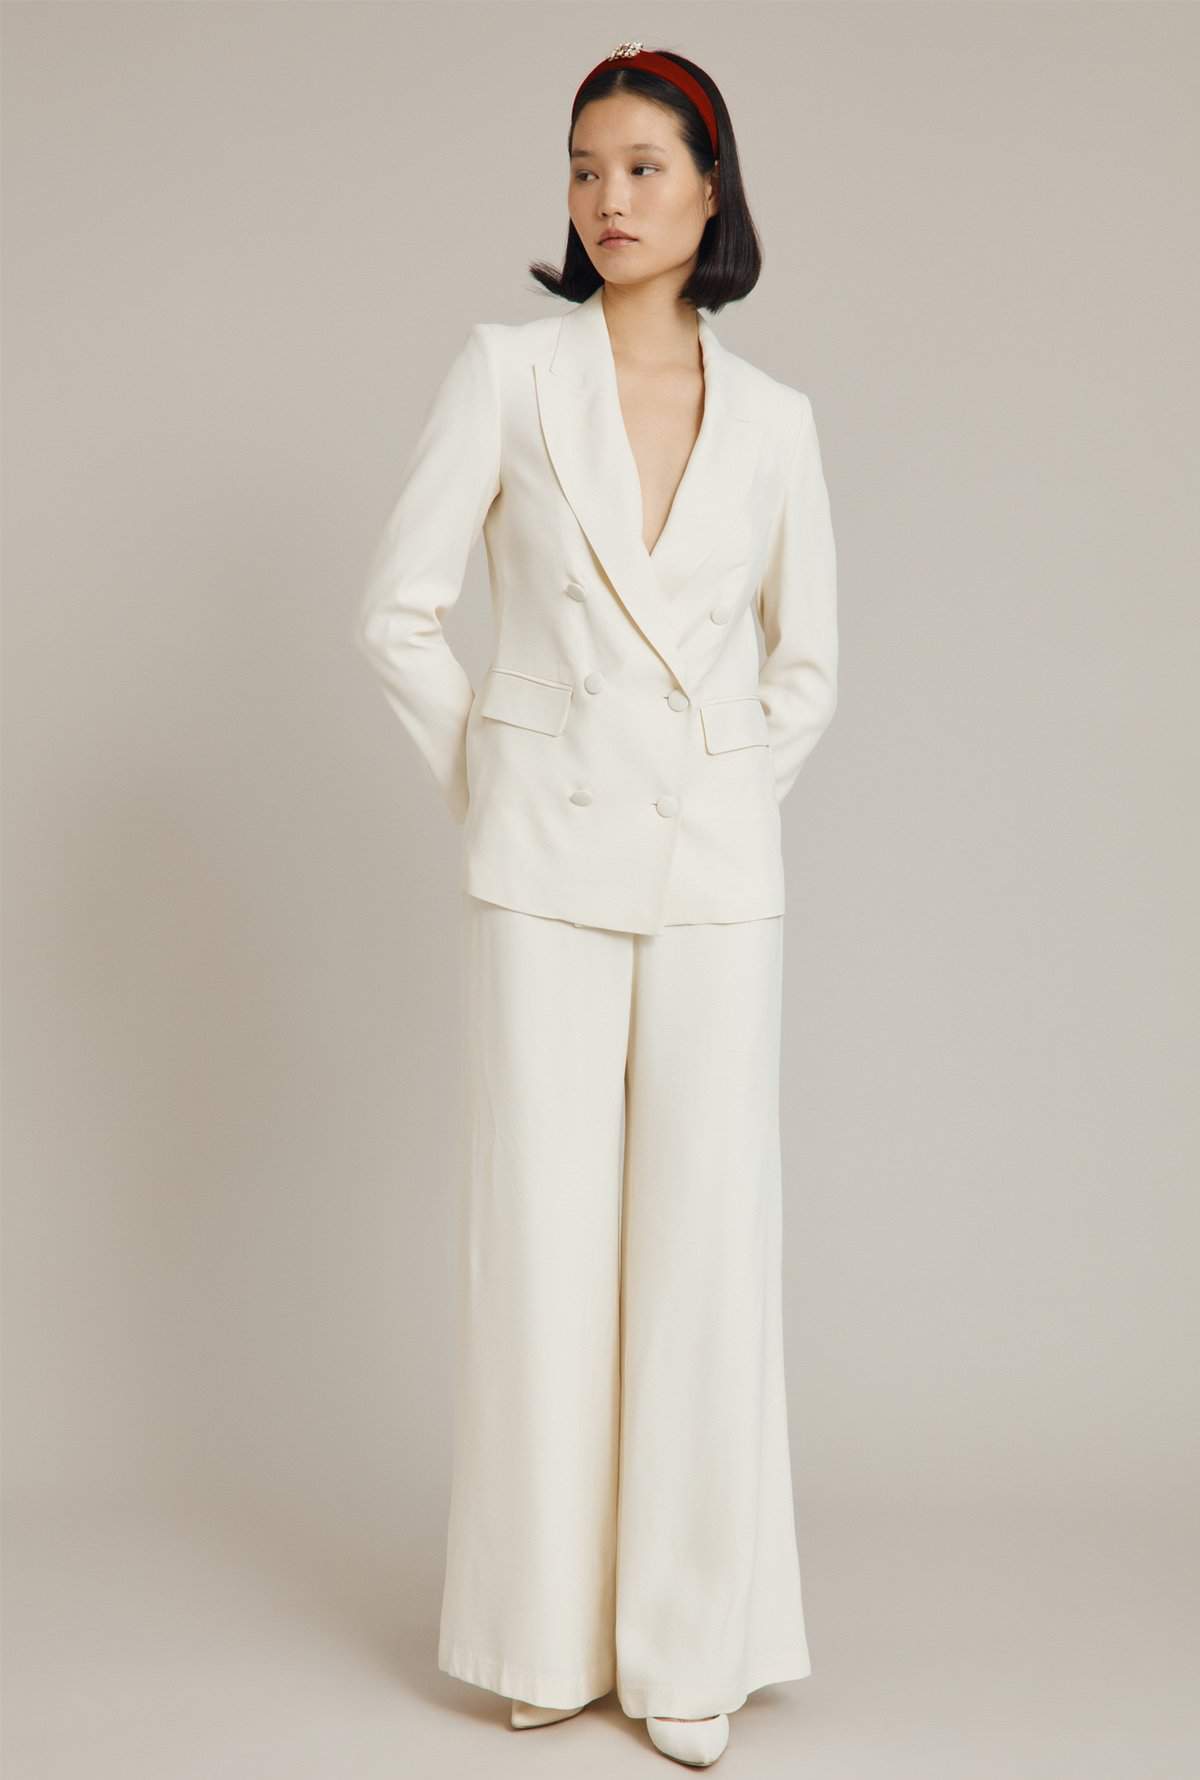 crepe ivory suit, double breasted jacket and pants